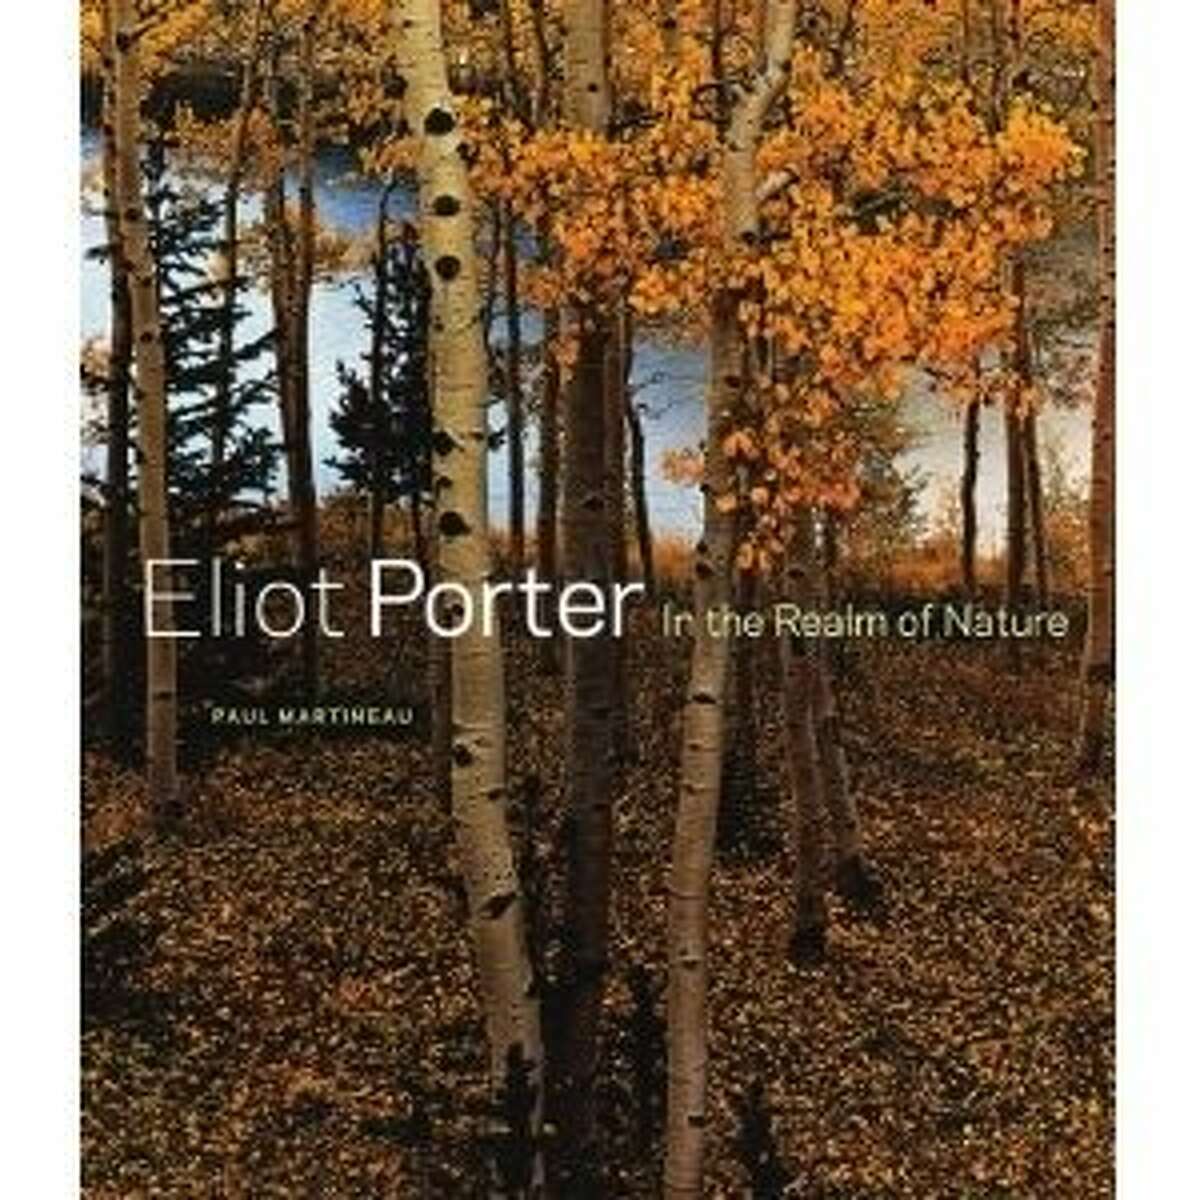 Eliot Porter: In the Realm of Nature, by Paul Martineau